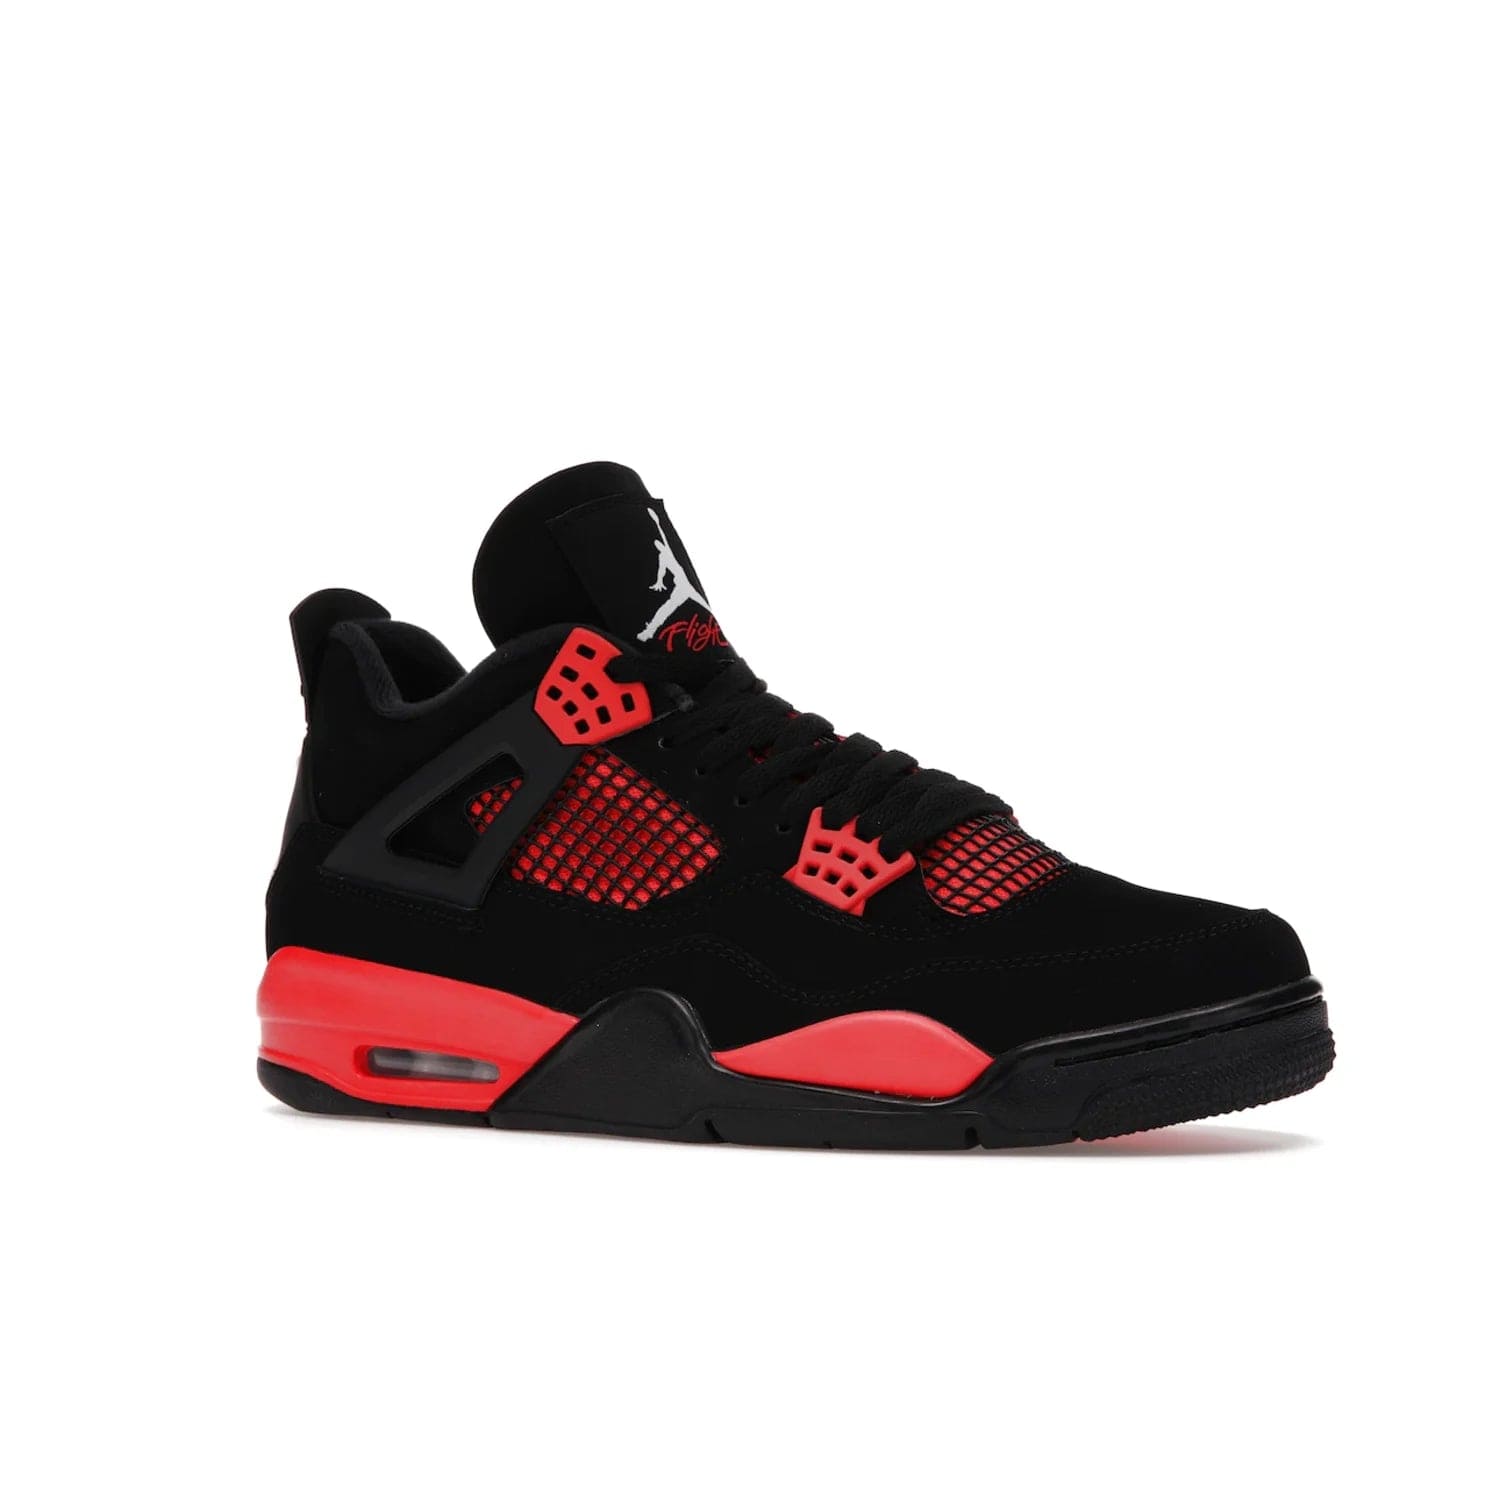 Jordan 4 Retro Red Thunder - Image 4 - Only at www.BallersClubKickz.com - Upscale your footwear with the Air Jordan 4 Retro Red Thunder. Featuring a Durabuck upper, red underlays, signature Flight patch, and vibrant red midsole, this retro sneaker adds style and edge. Releases in January 2022.